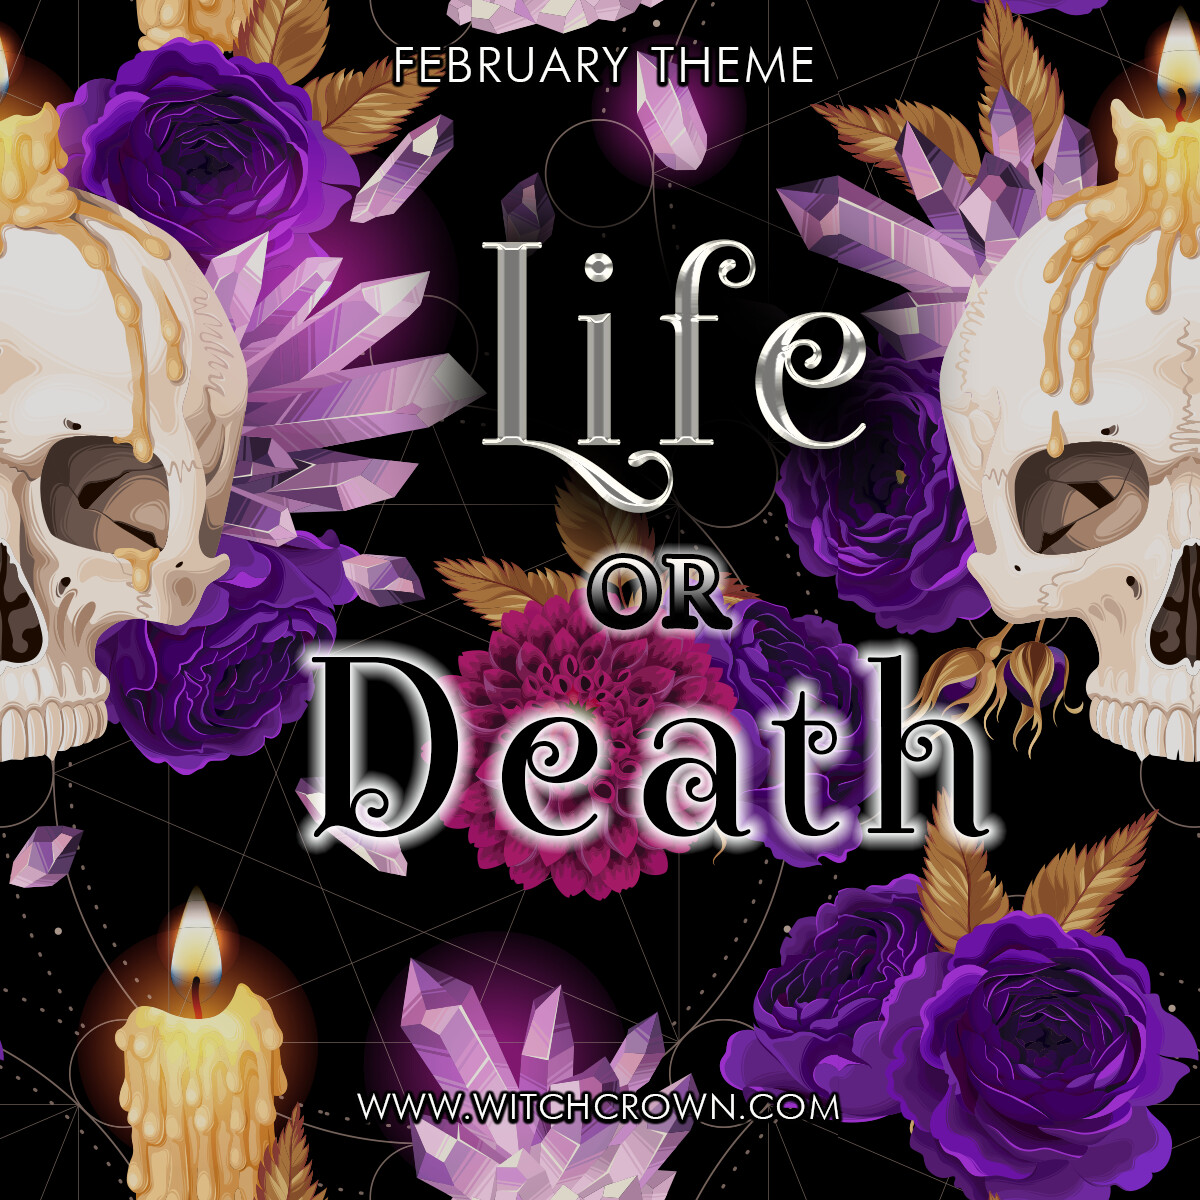 Februarbox - Life or Death